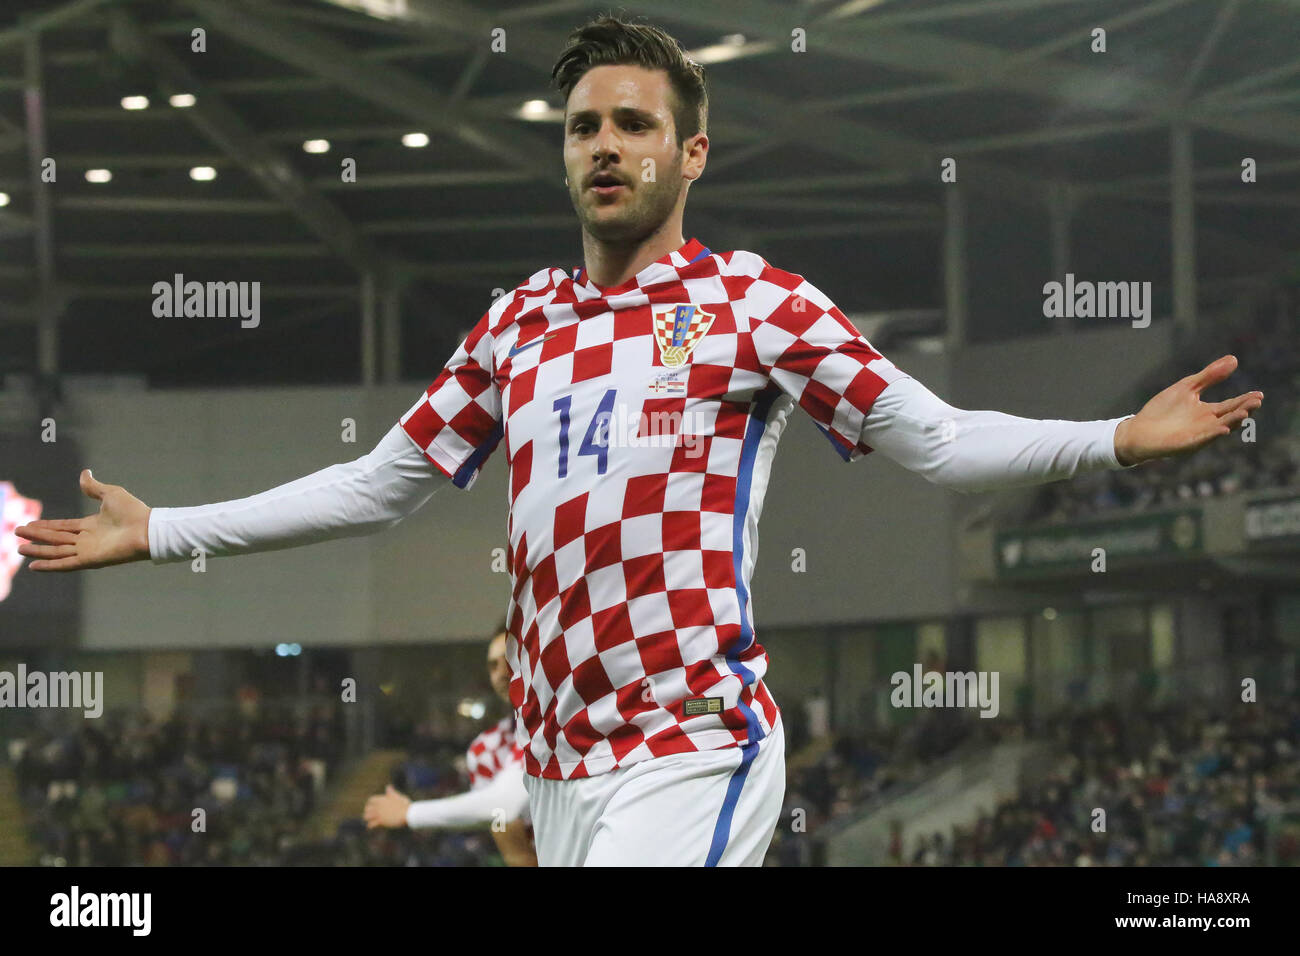 Duje Cop Croatian Footballer High Resolution Stock Photography and Images -  Alamy